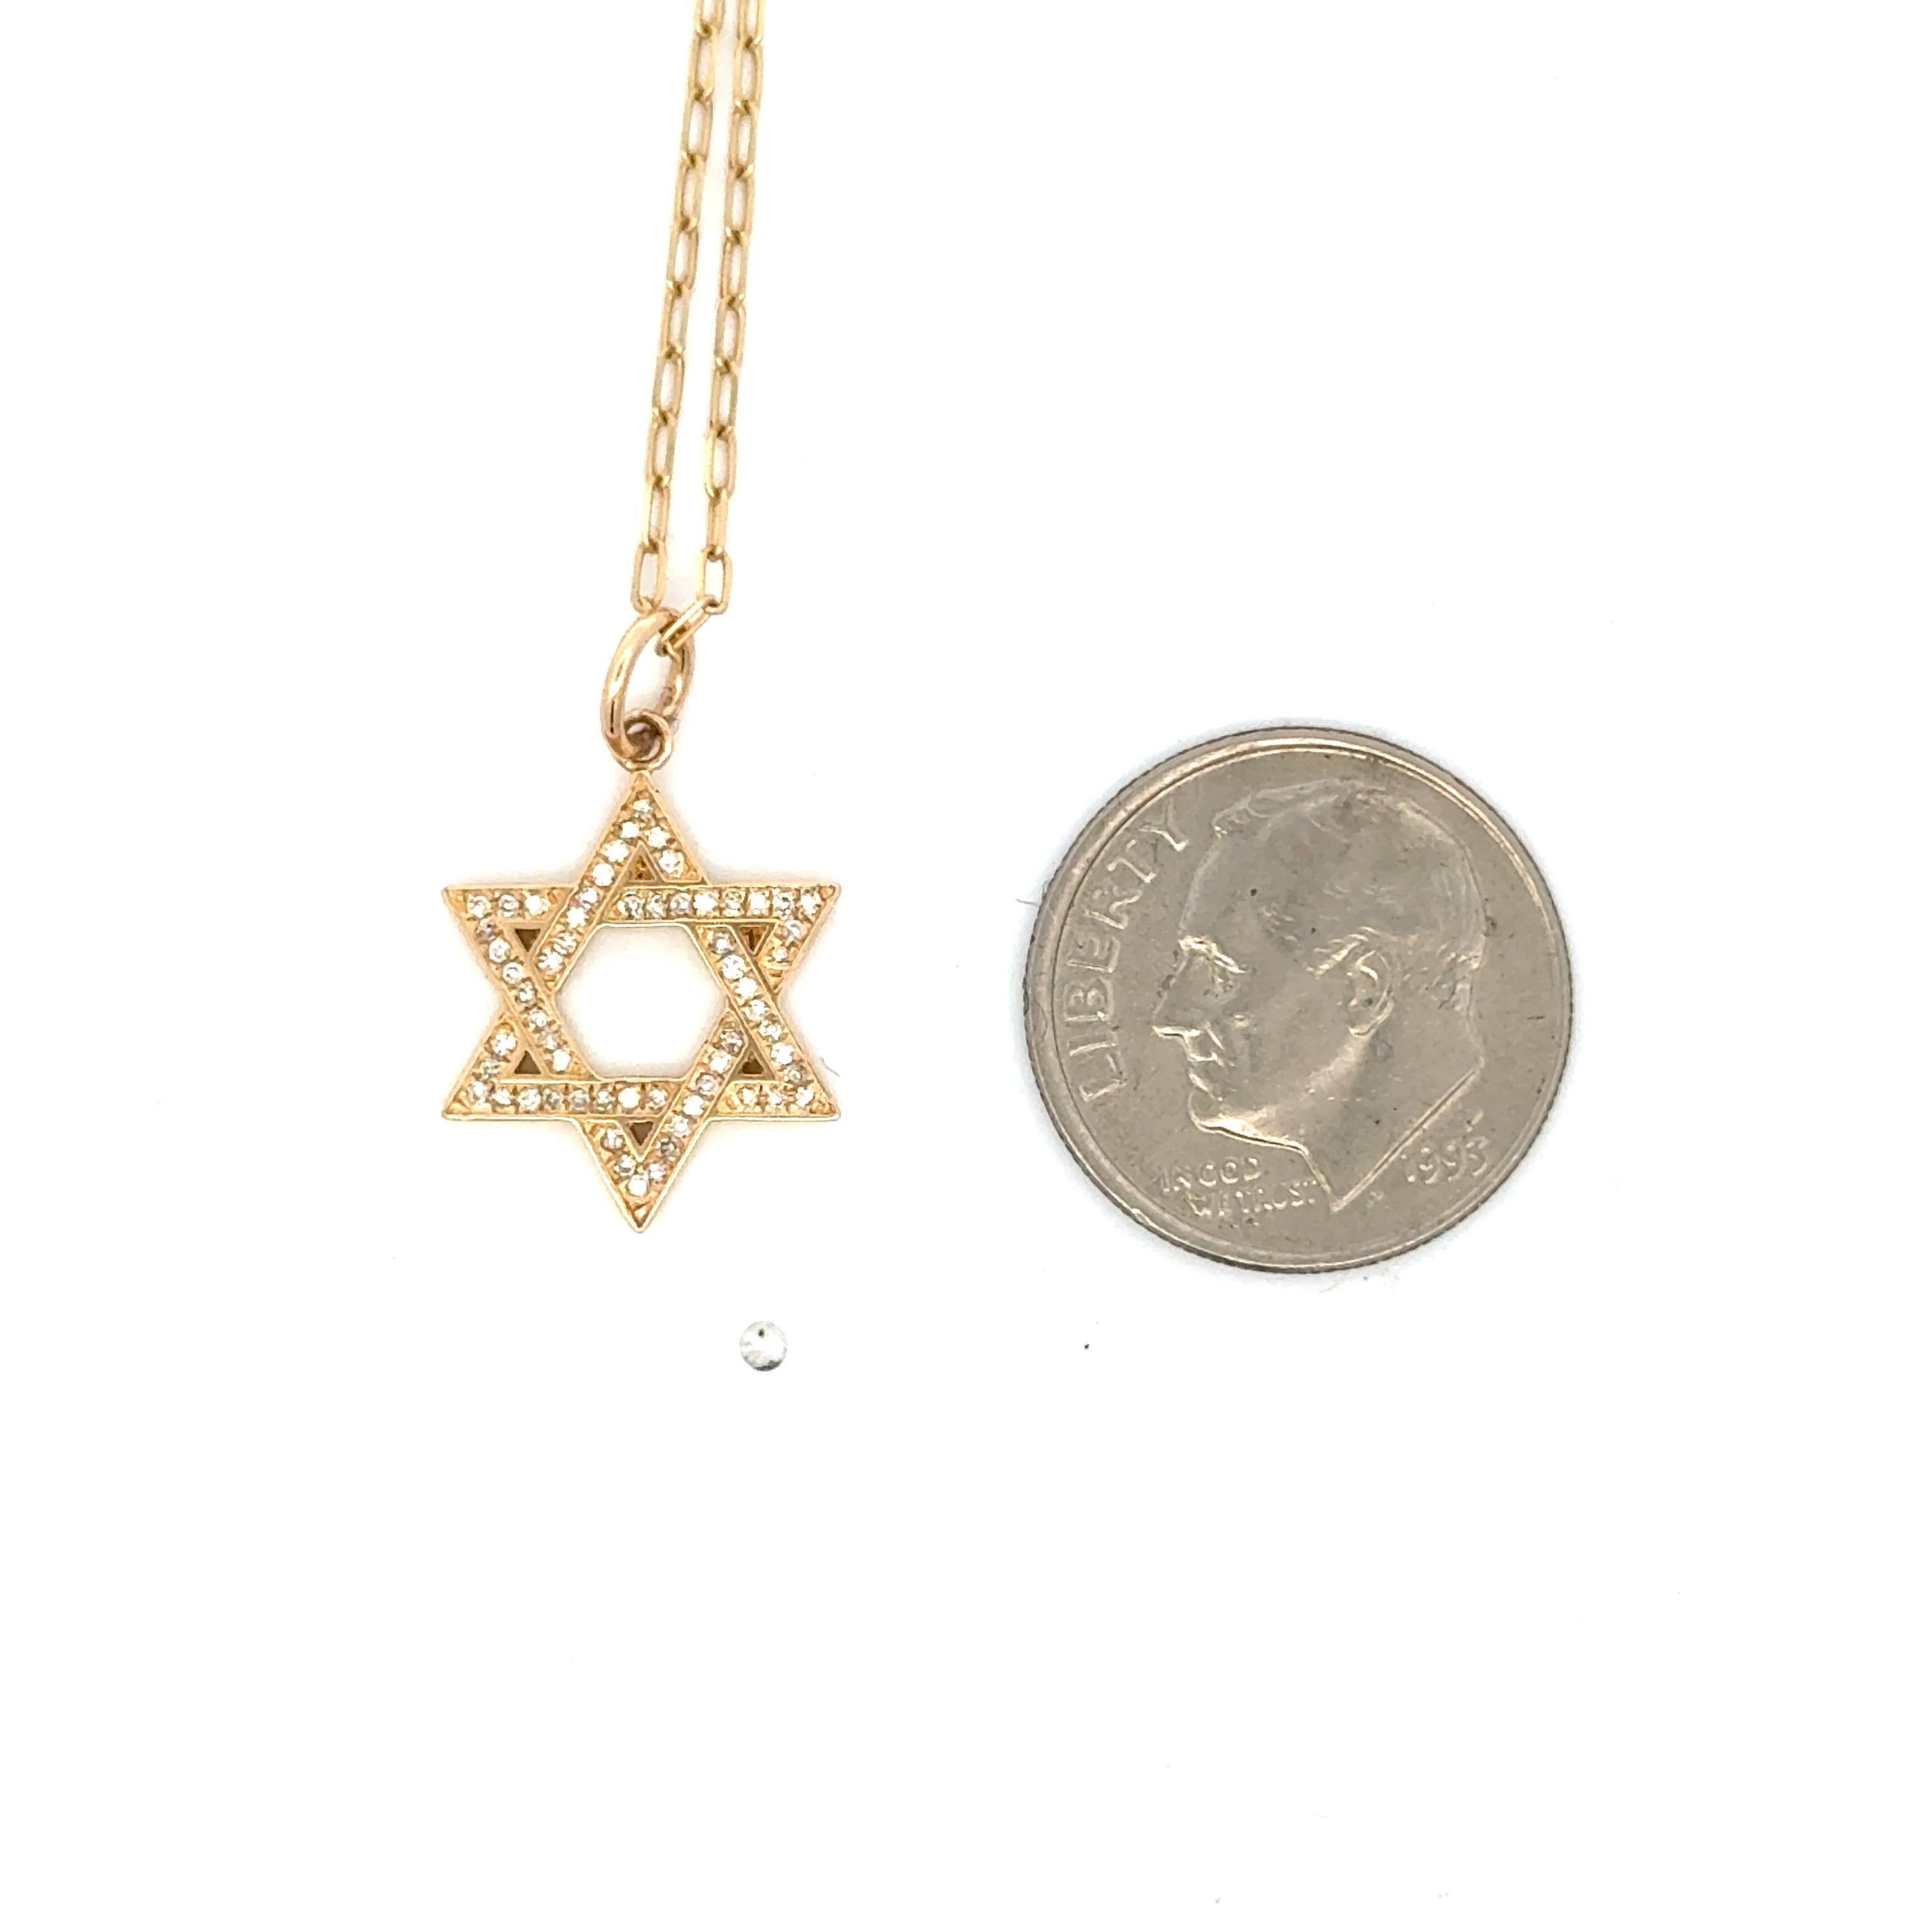 Star of David pendant featuring round brilliants weighing 0.11 carats in 14 karat yellow gold. 